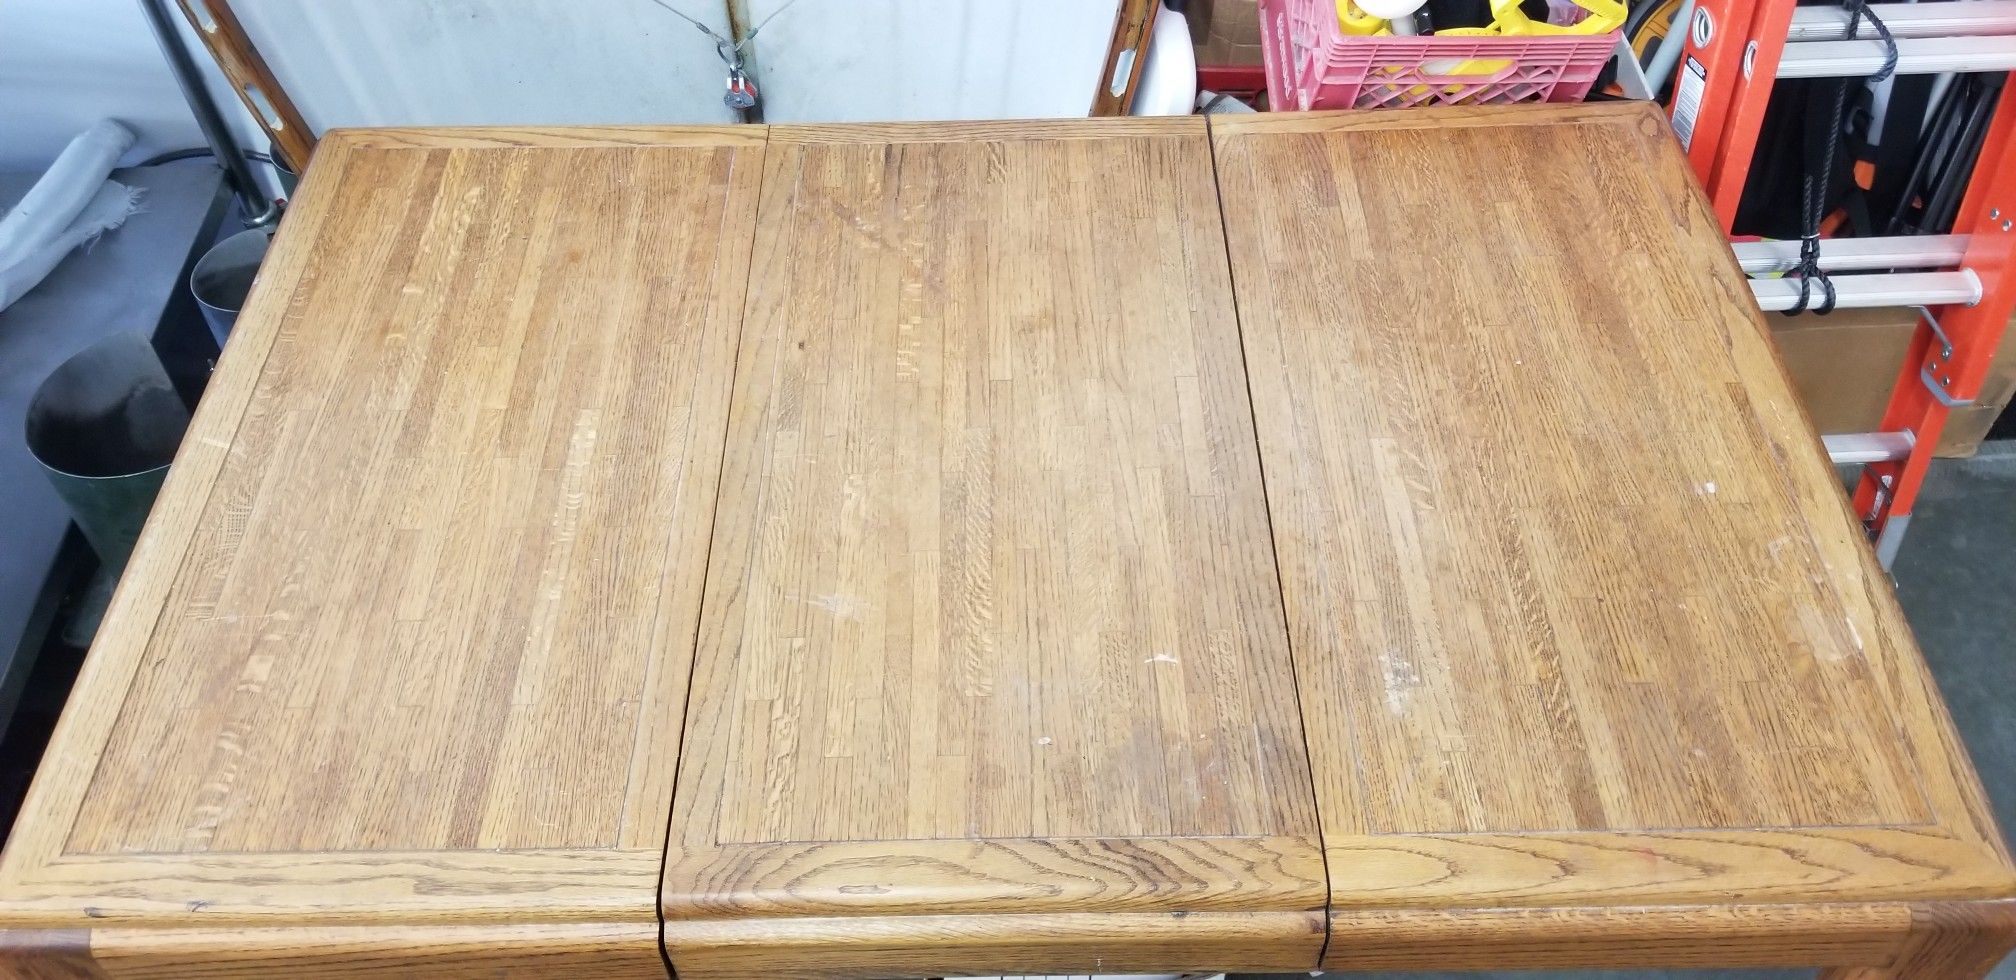 FREE dining/kitchen table